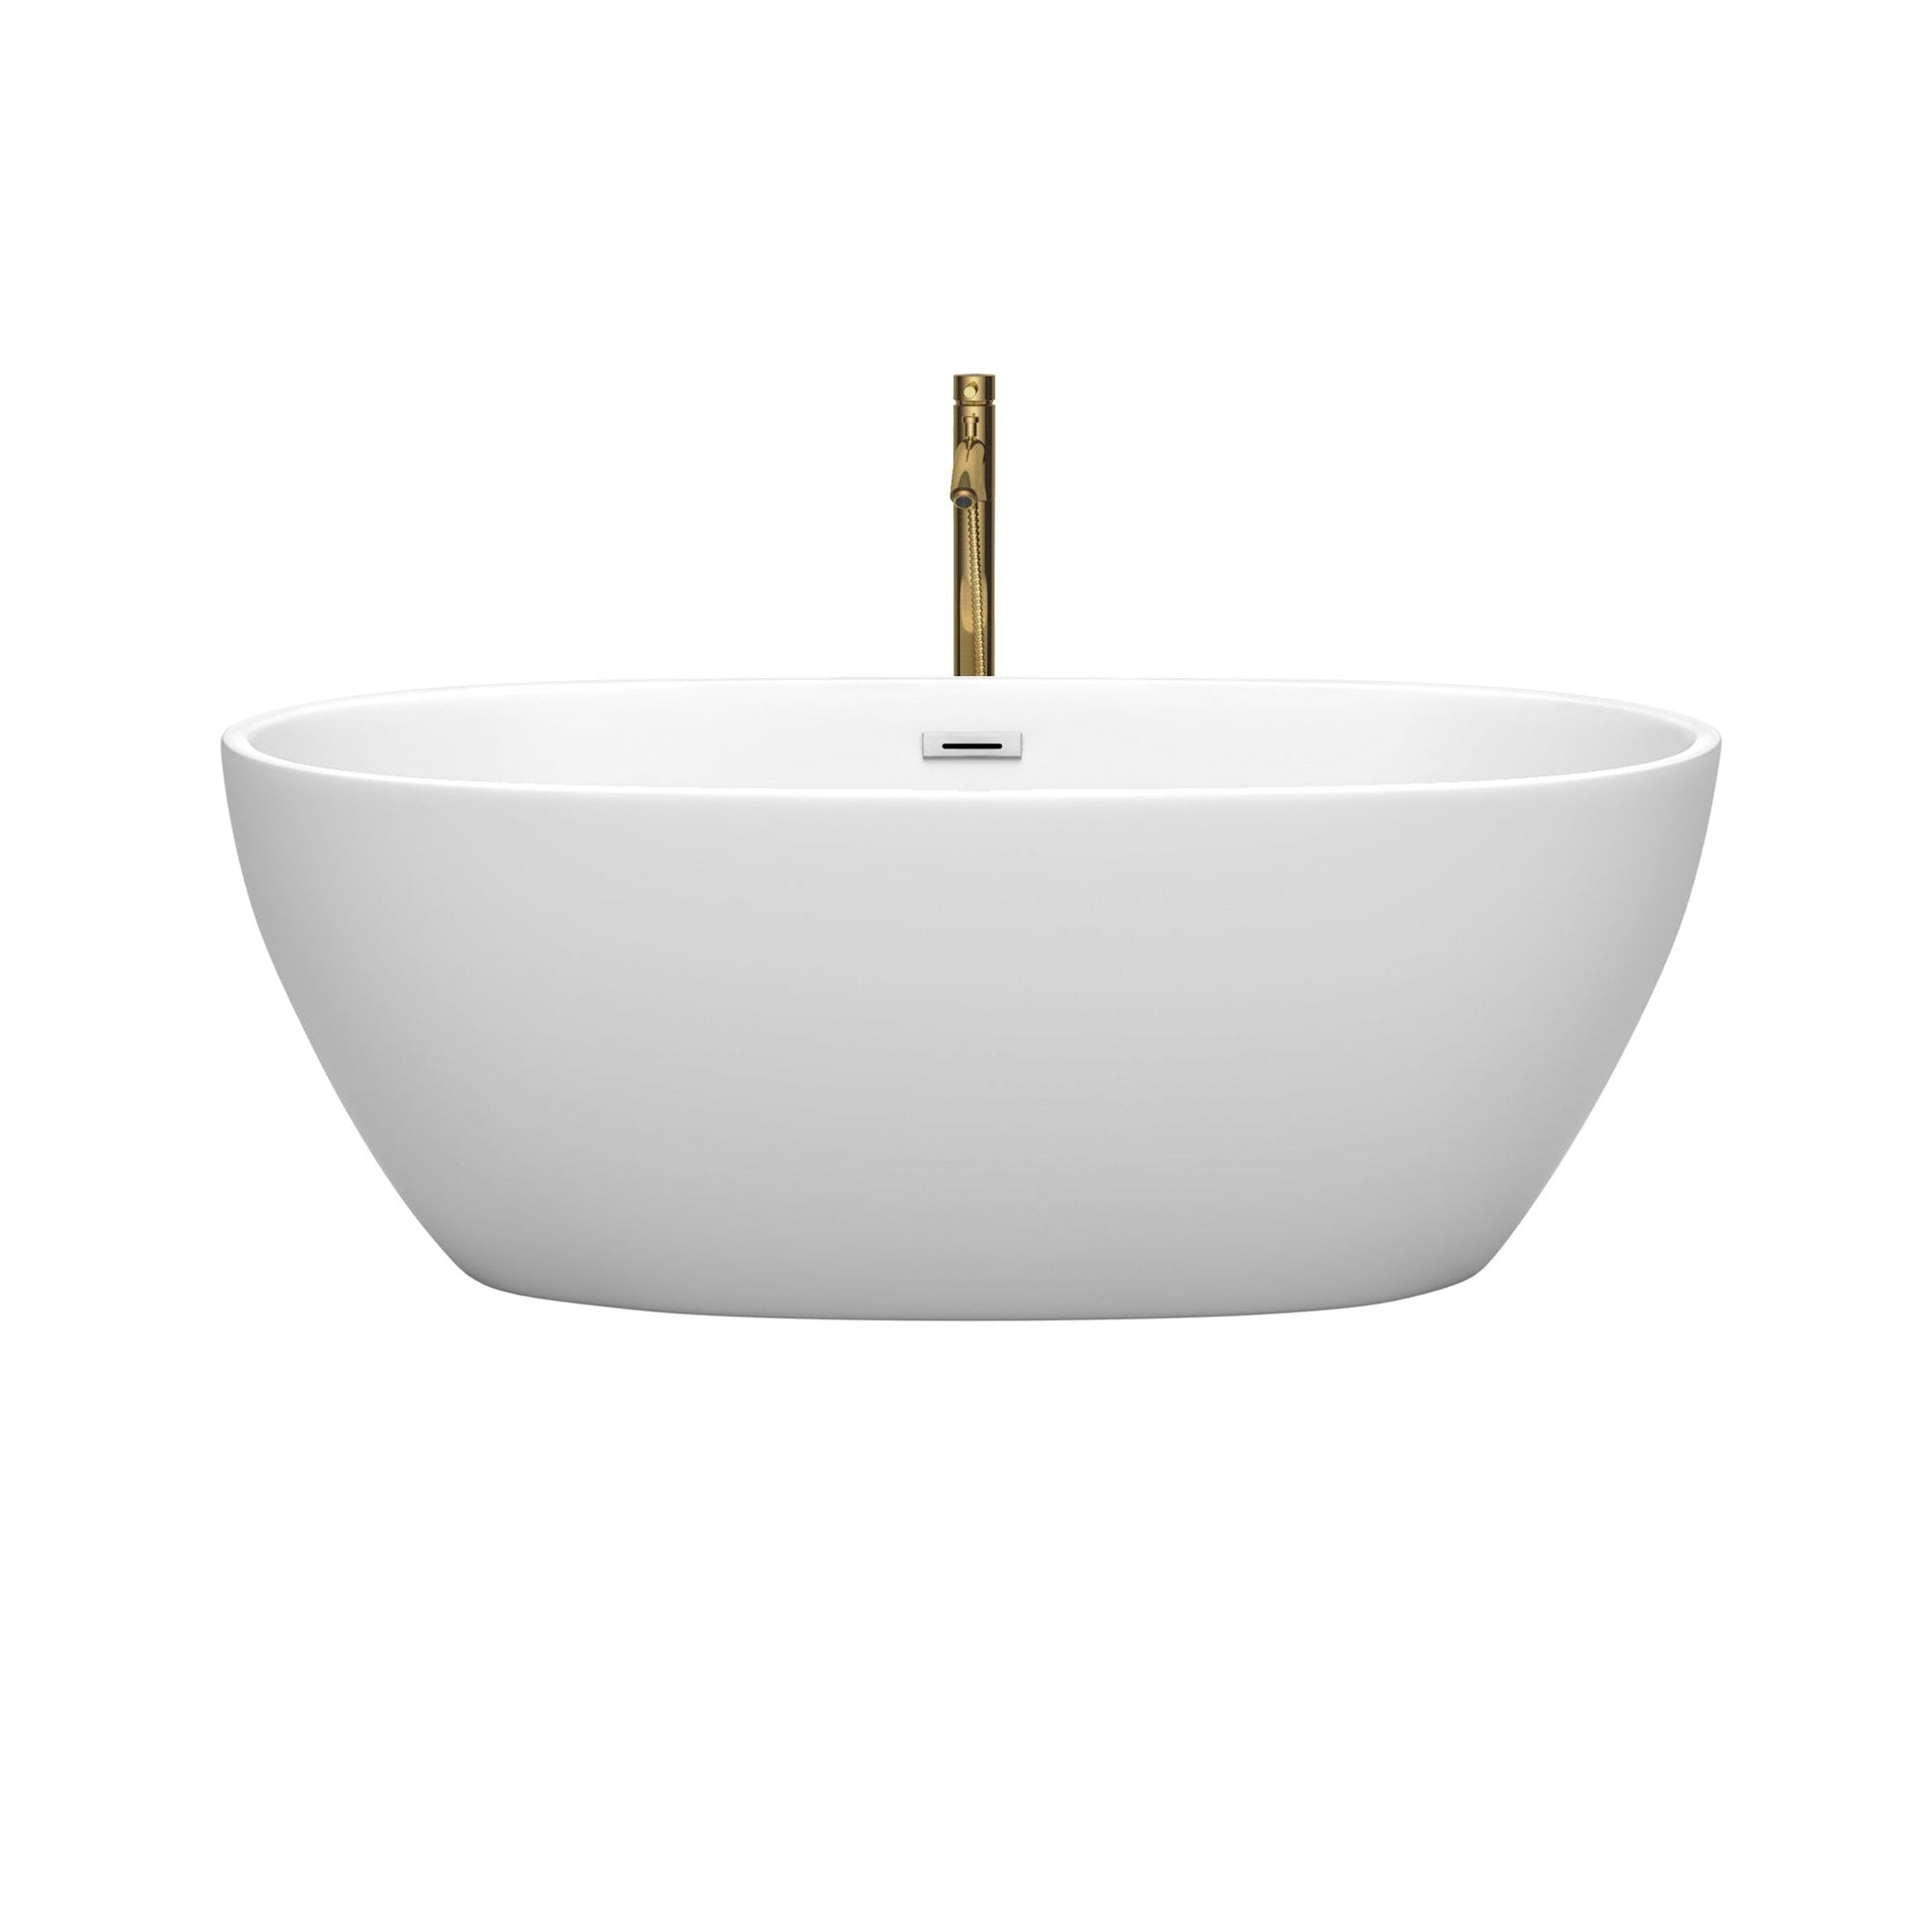 Wyndham Collection Juno 63" Freestanding Bathtub in Matte White With Polished Chrome Trim and Floor Mounted Faucet in Brushed Gold